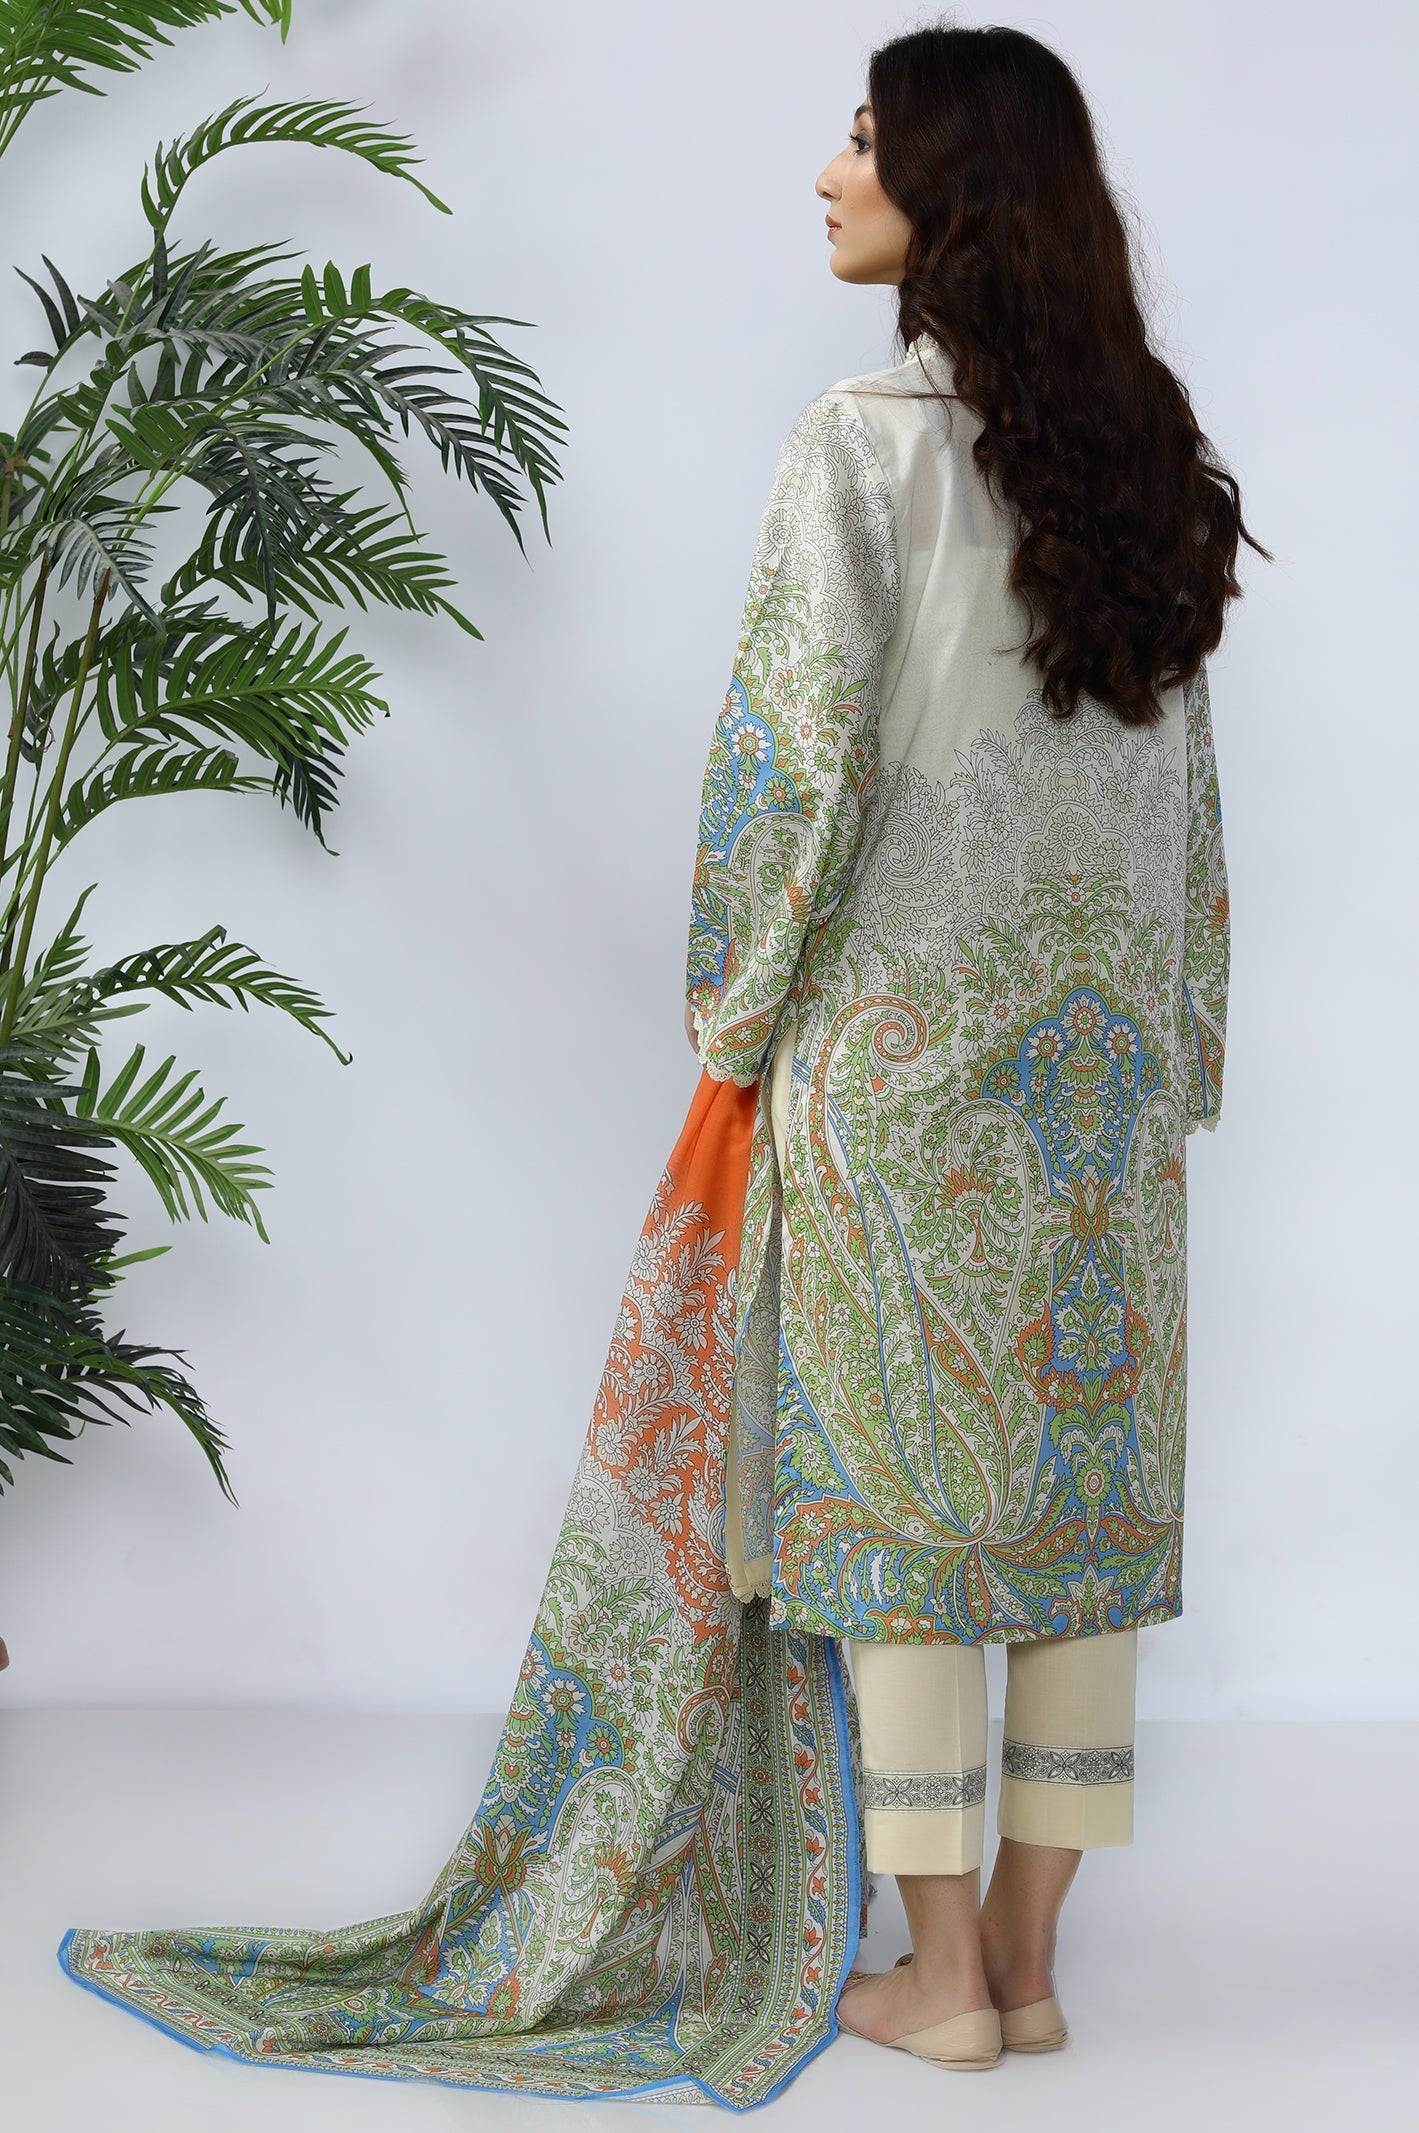 Unstitched 3 Piece Lawn Printed Shirt, Printed Dupatta, Dyed Trouser - Diners